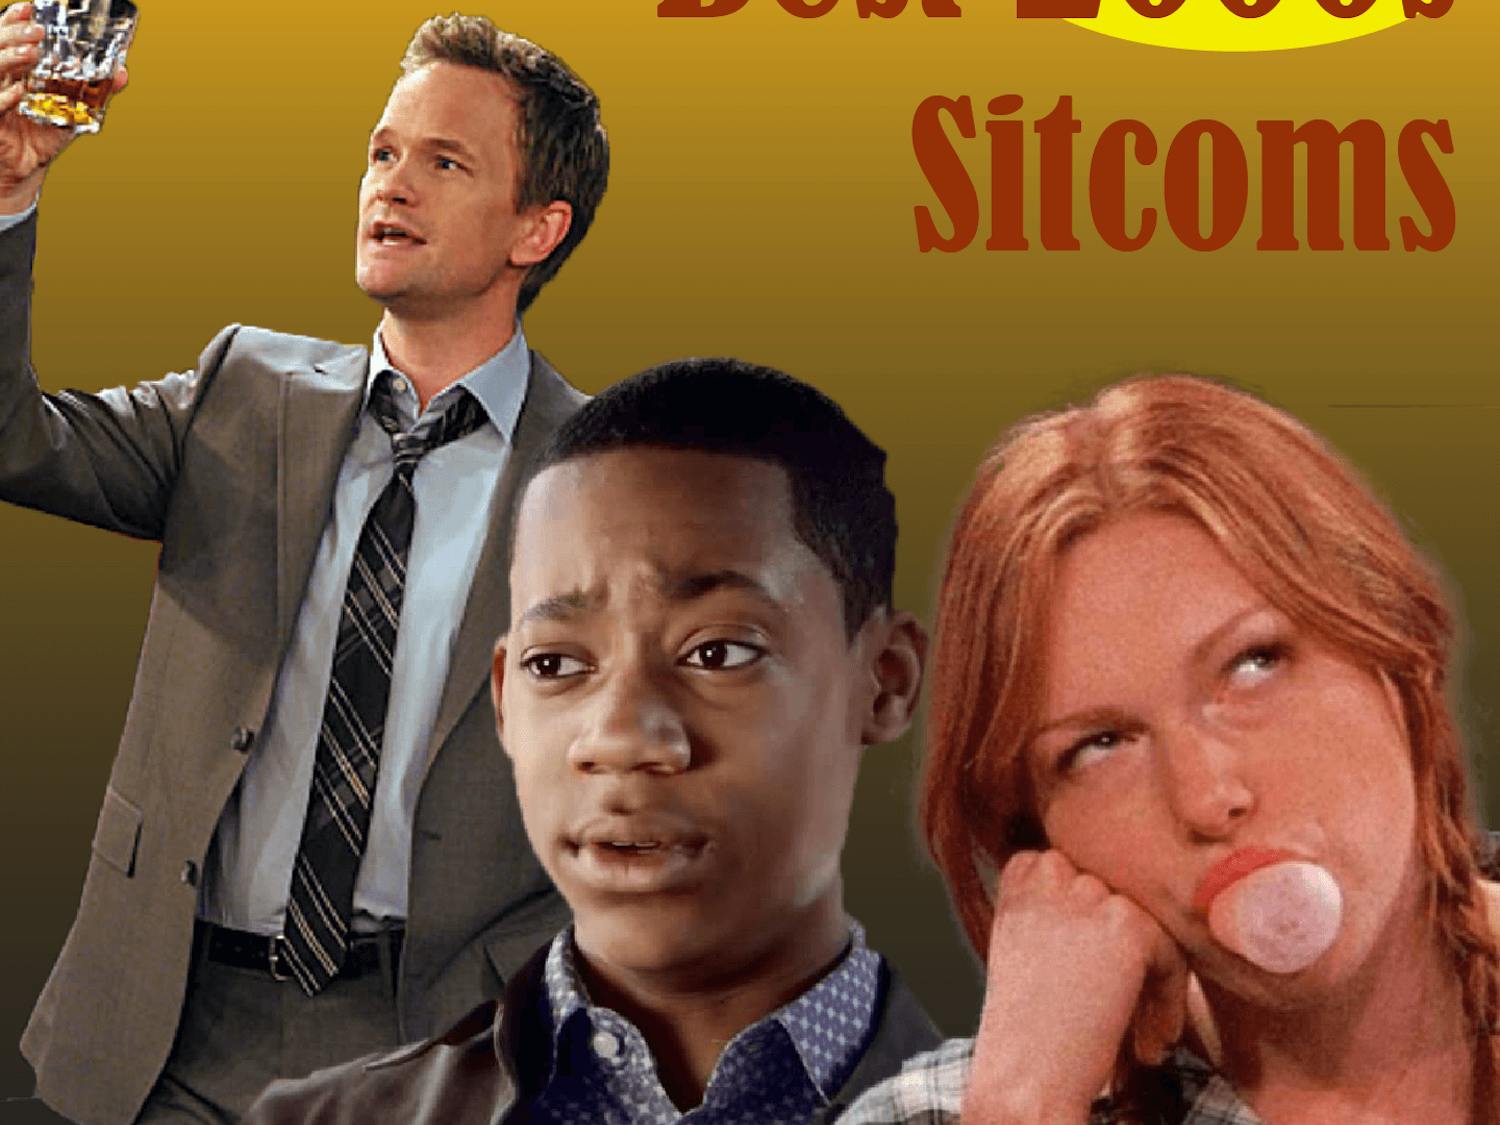 The 2000s gave Gen Z so many sitcoms that still are, as the “How I Met Your Mother” star Barney Stinson always says, “legen … wait for it … and I hope you’re not lactose intolerant, because the second half of the word is … dary! Legendary!”